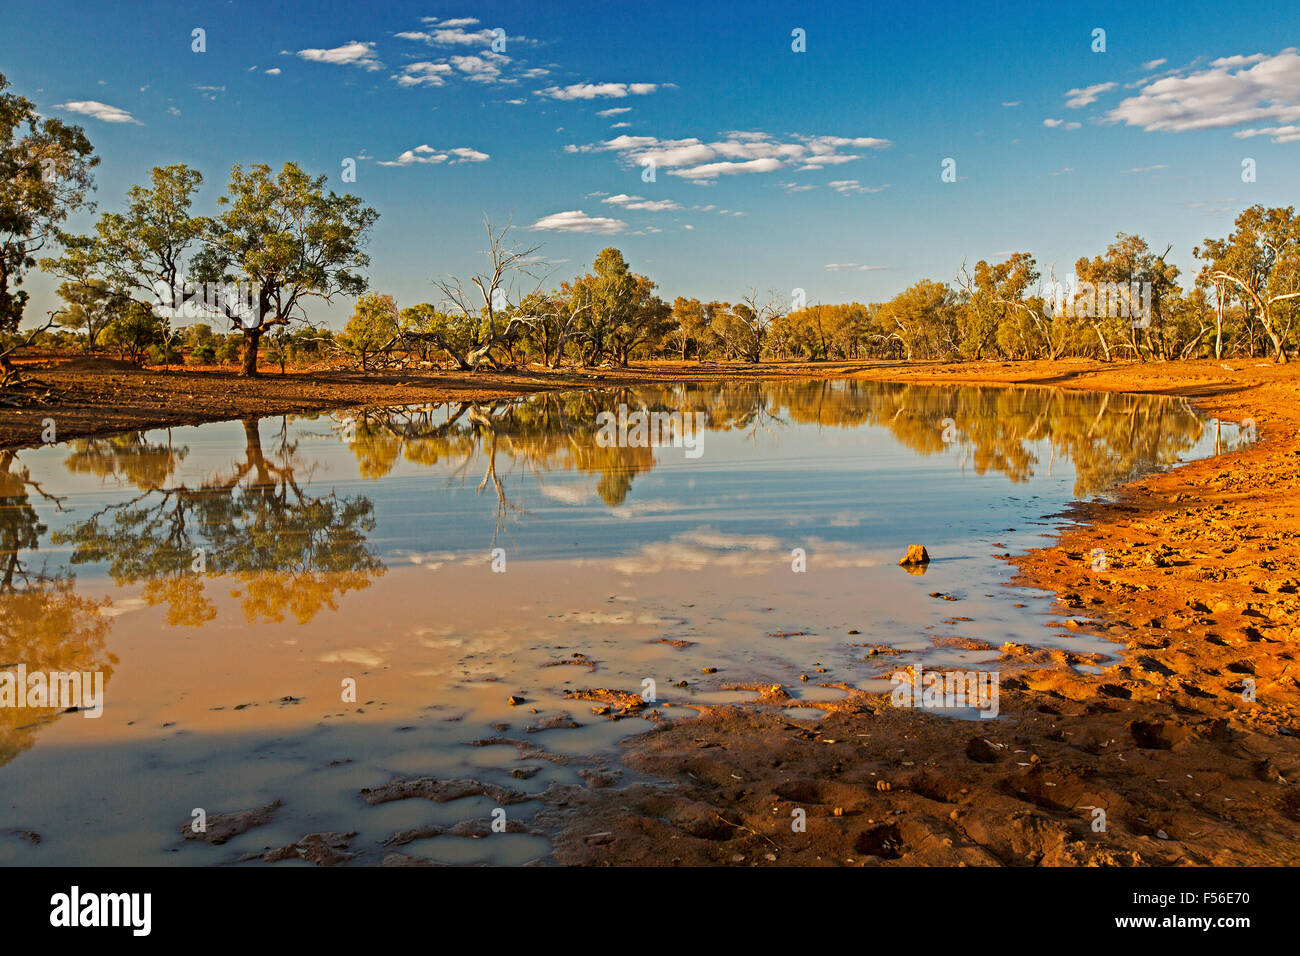 Australian outback landscape during drought with trees & blue sky reflected in mirror surface of water at oasis at dusk Stock Photo